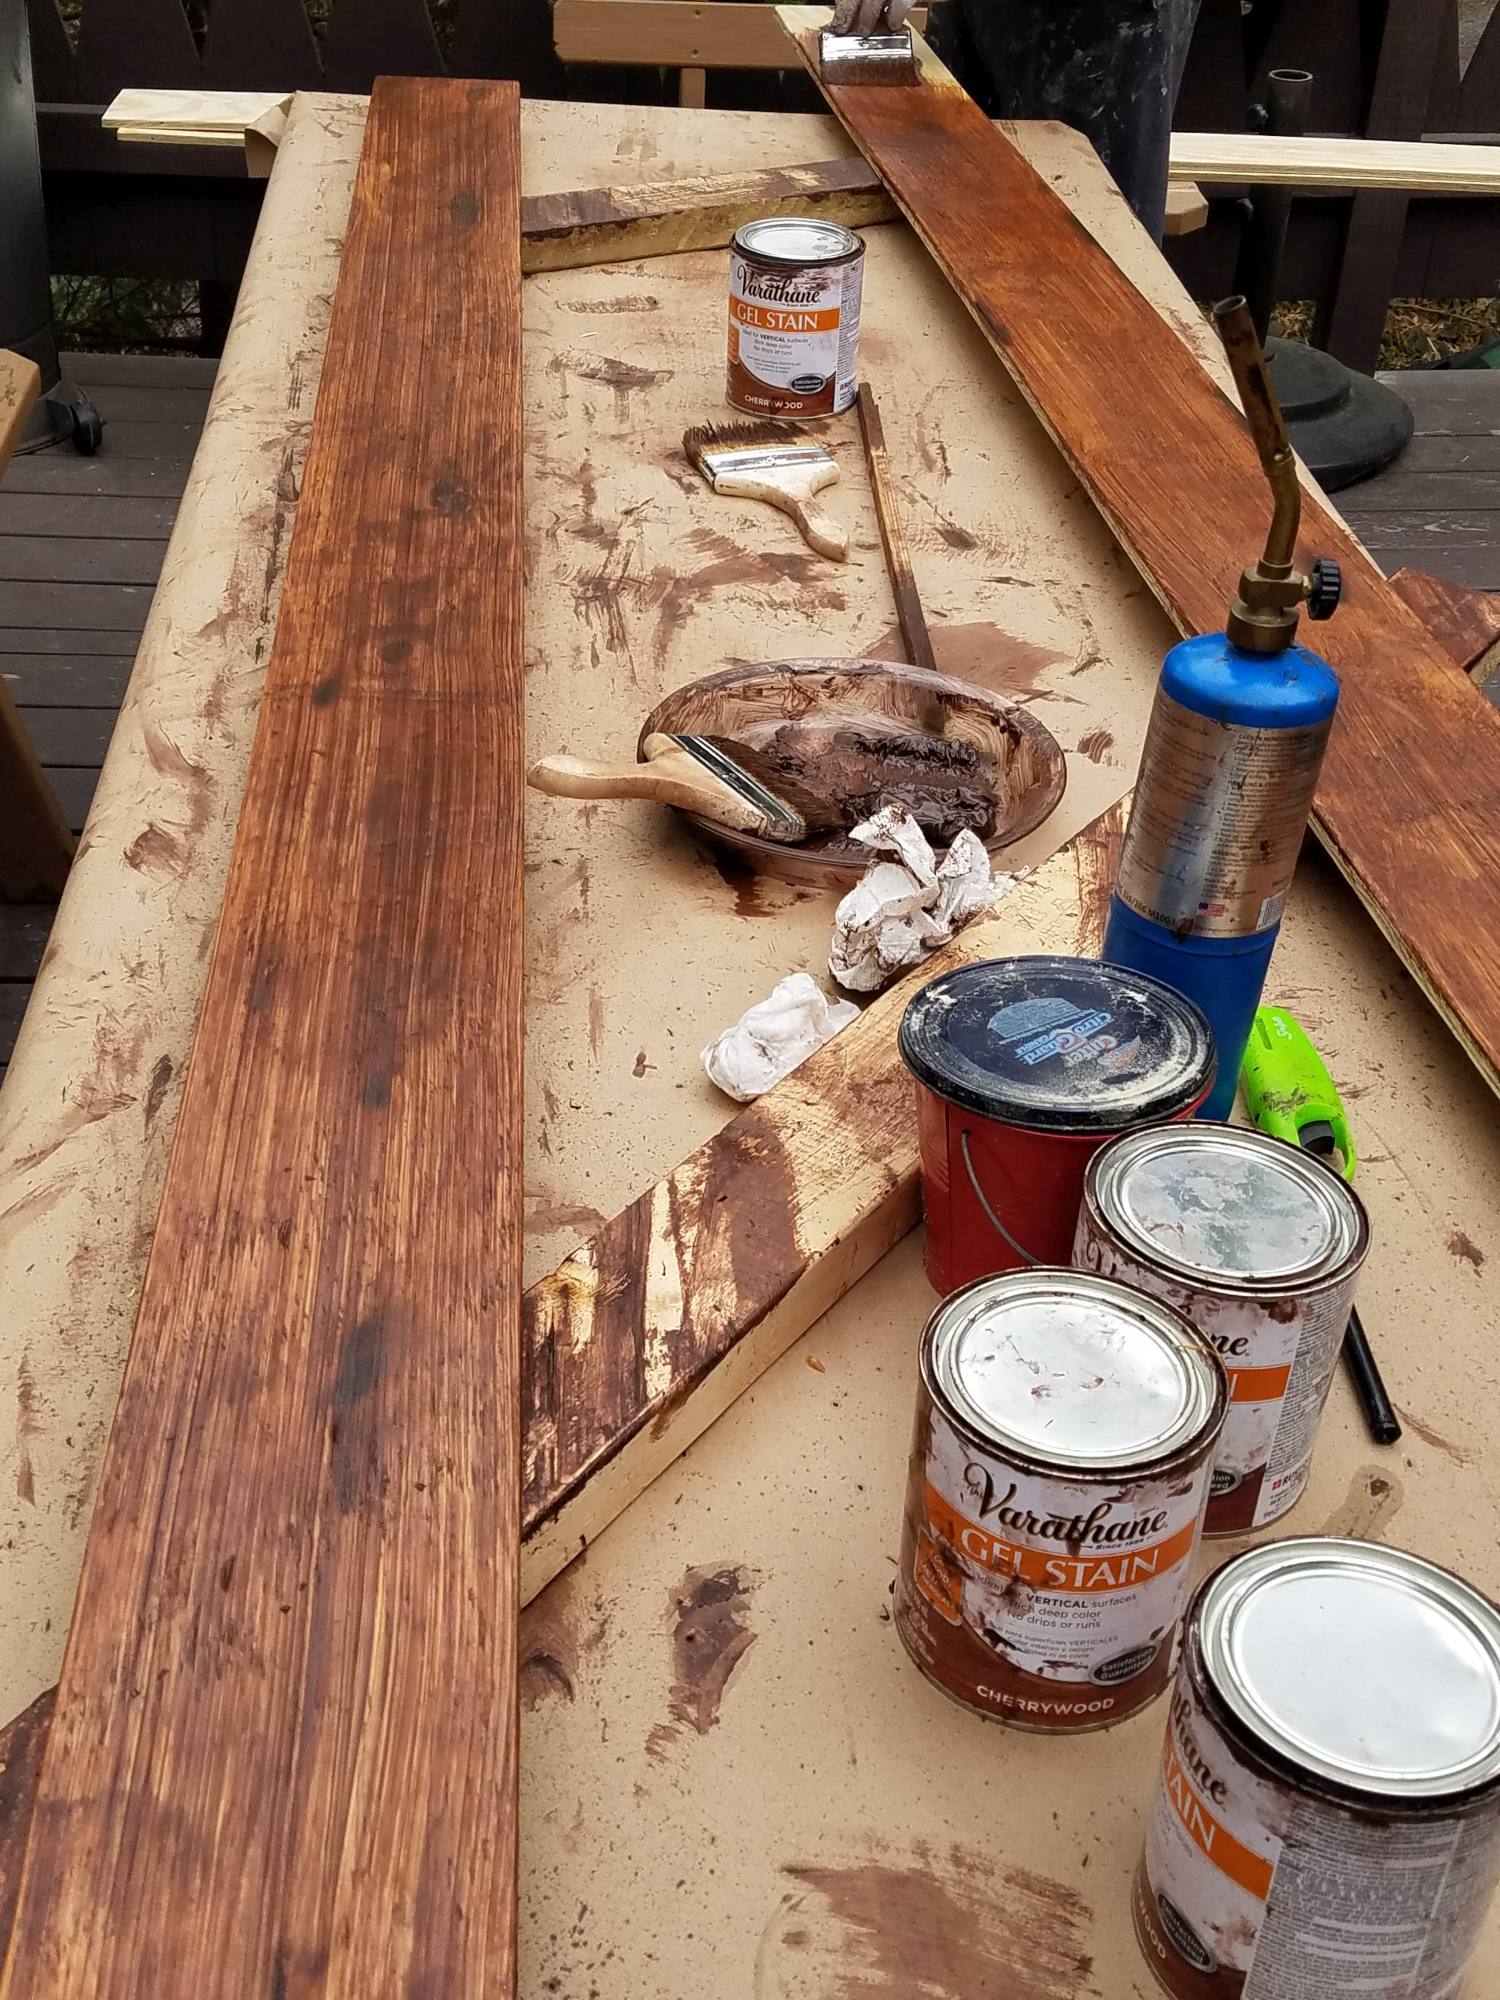 DIY Farmhouse Wide Plank Flooring Made From Plywood - Applying Gel Stain and distressing to the wide plank plywood floor boards